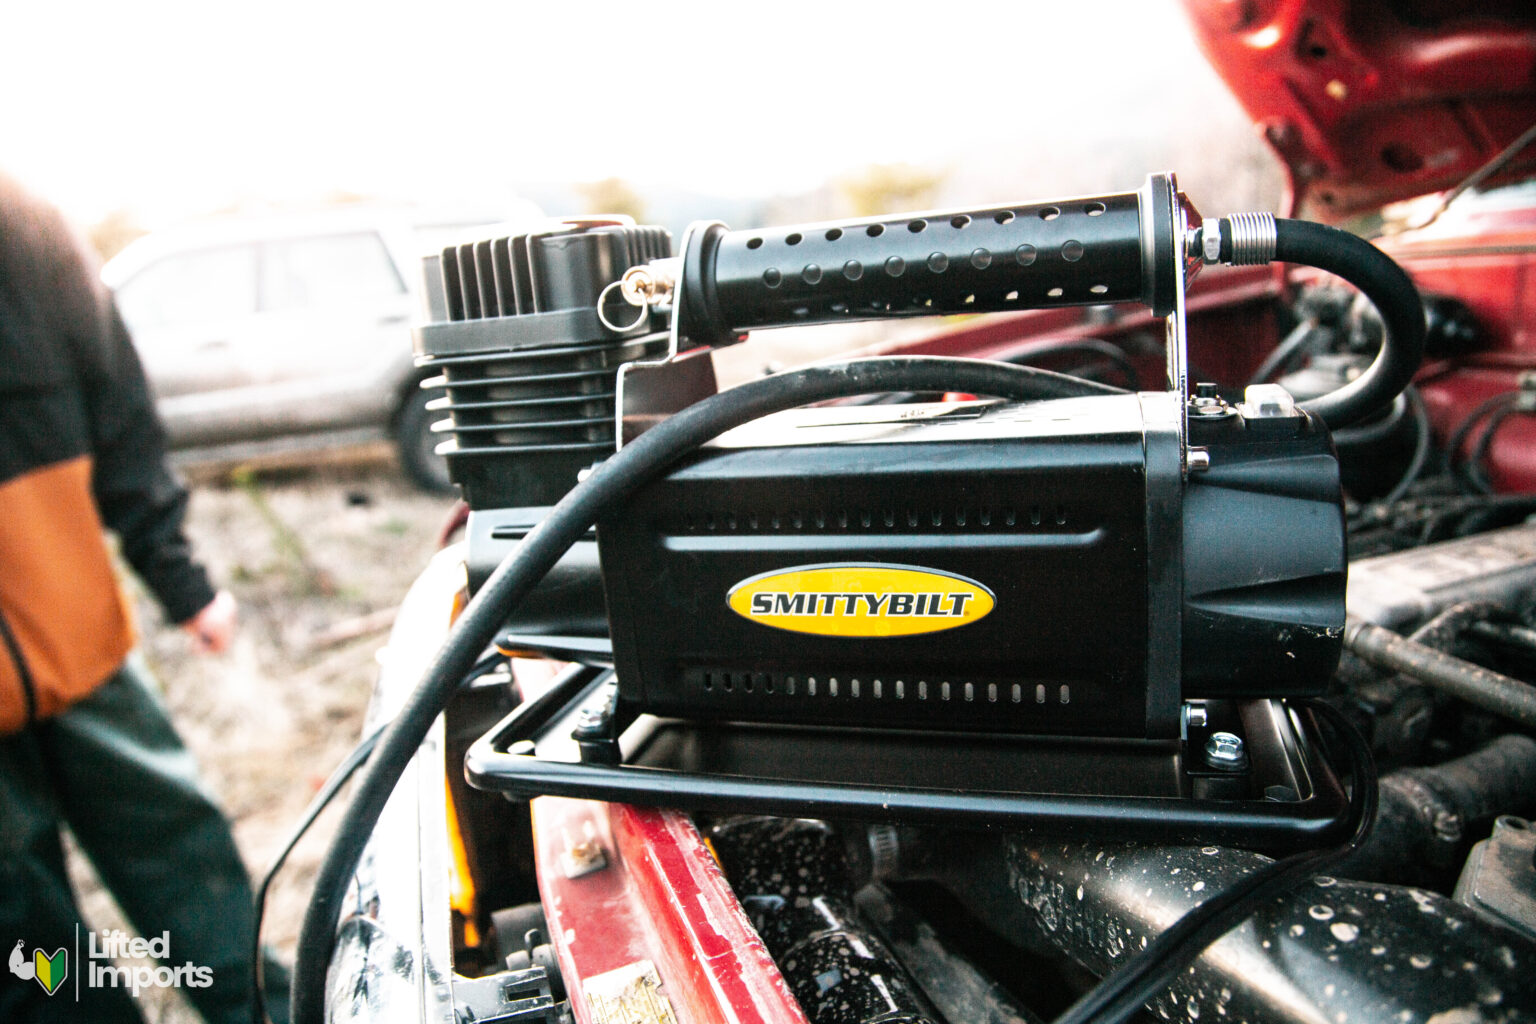 smittybilt portable air compressor for off road